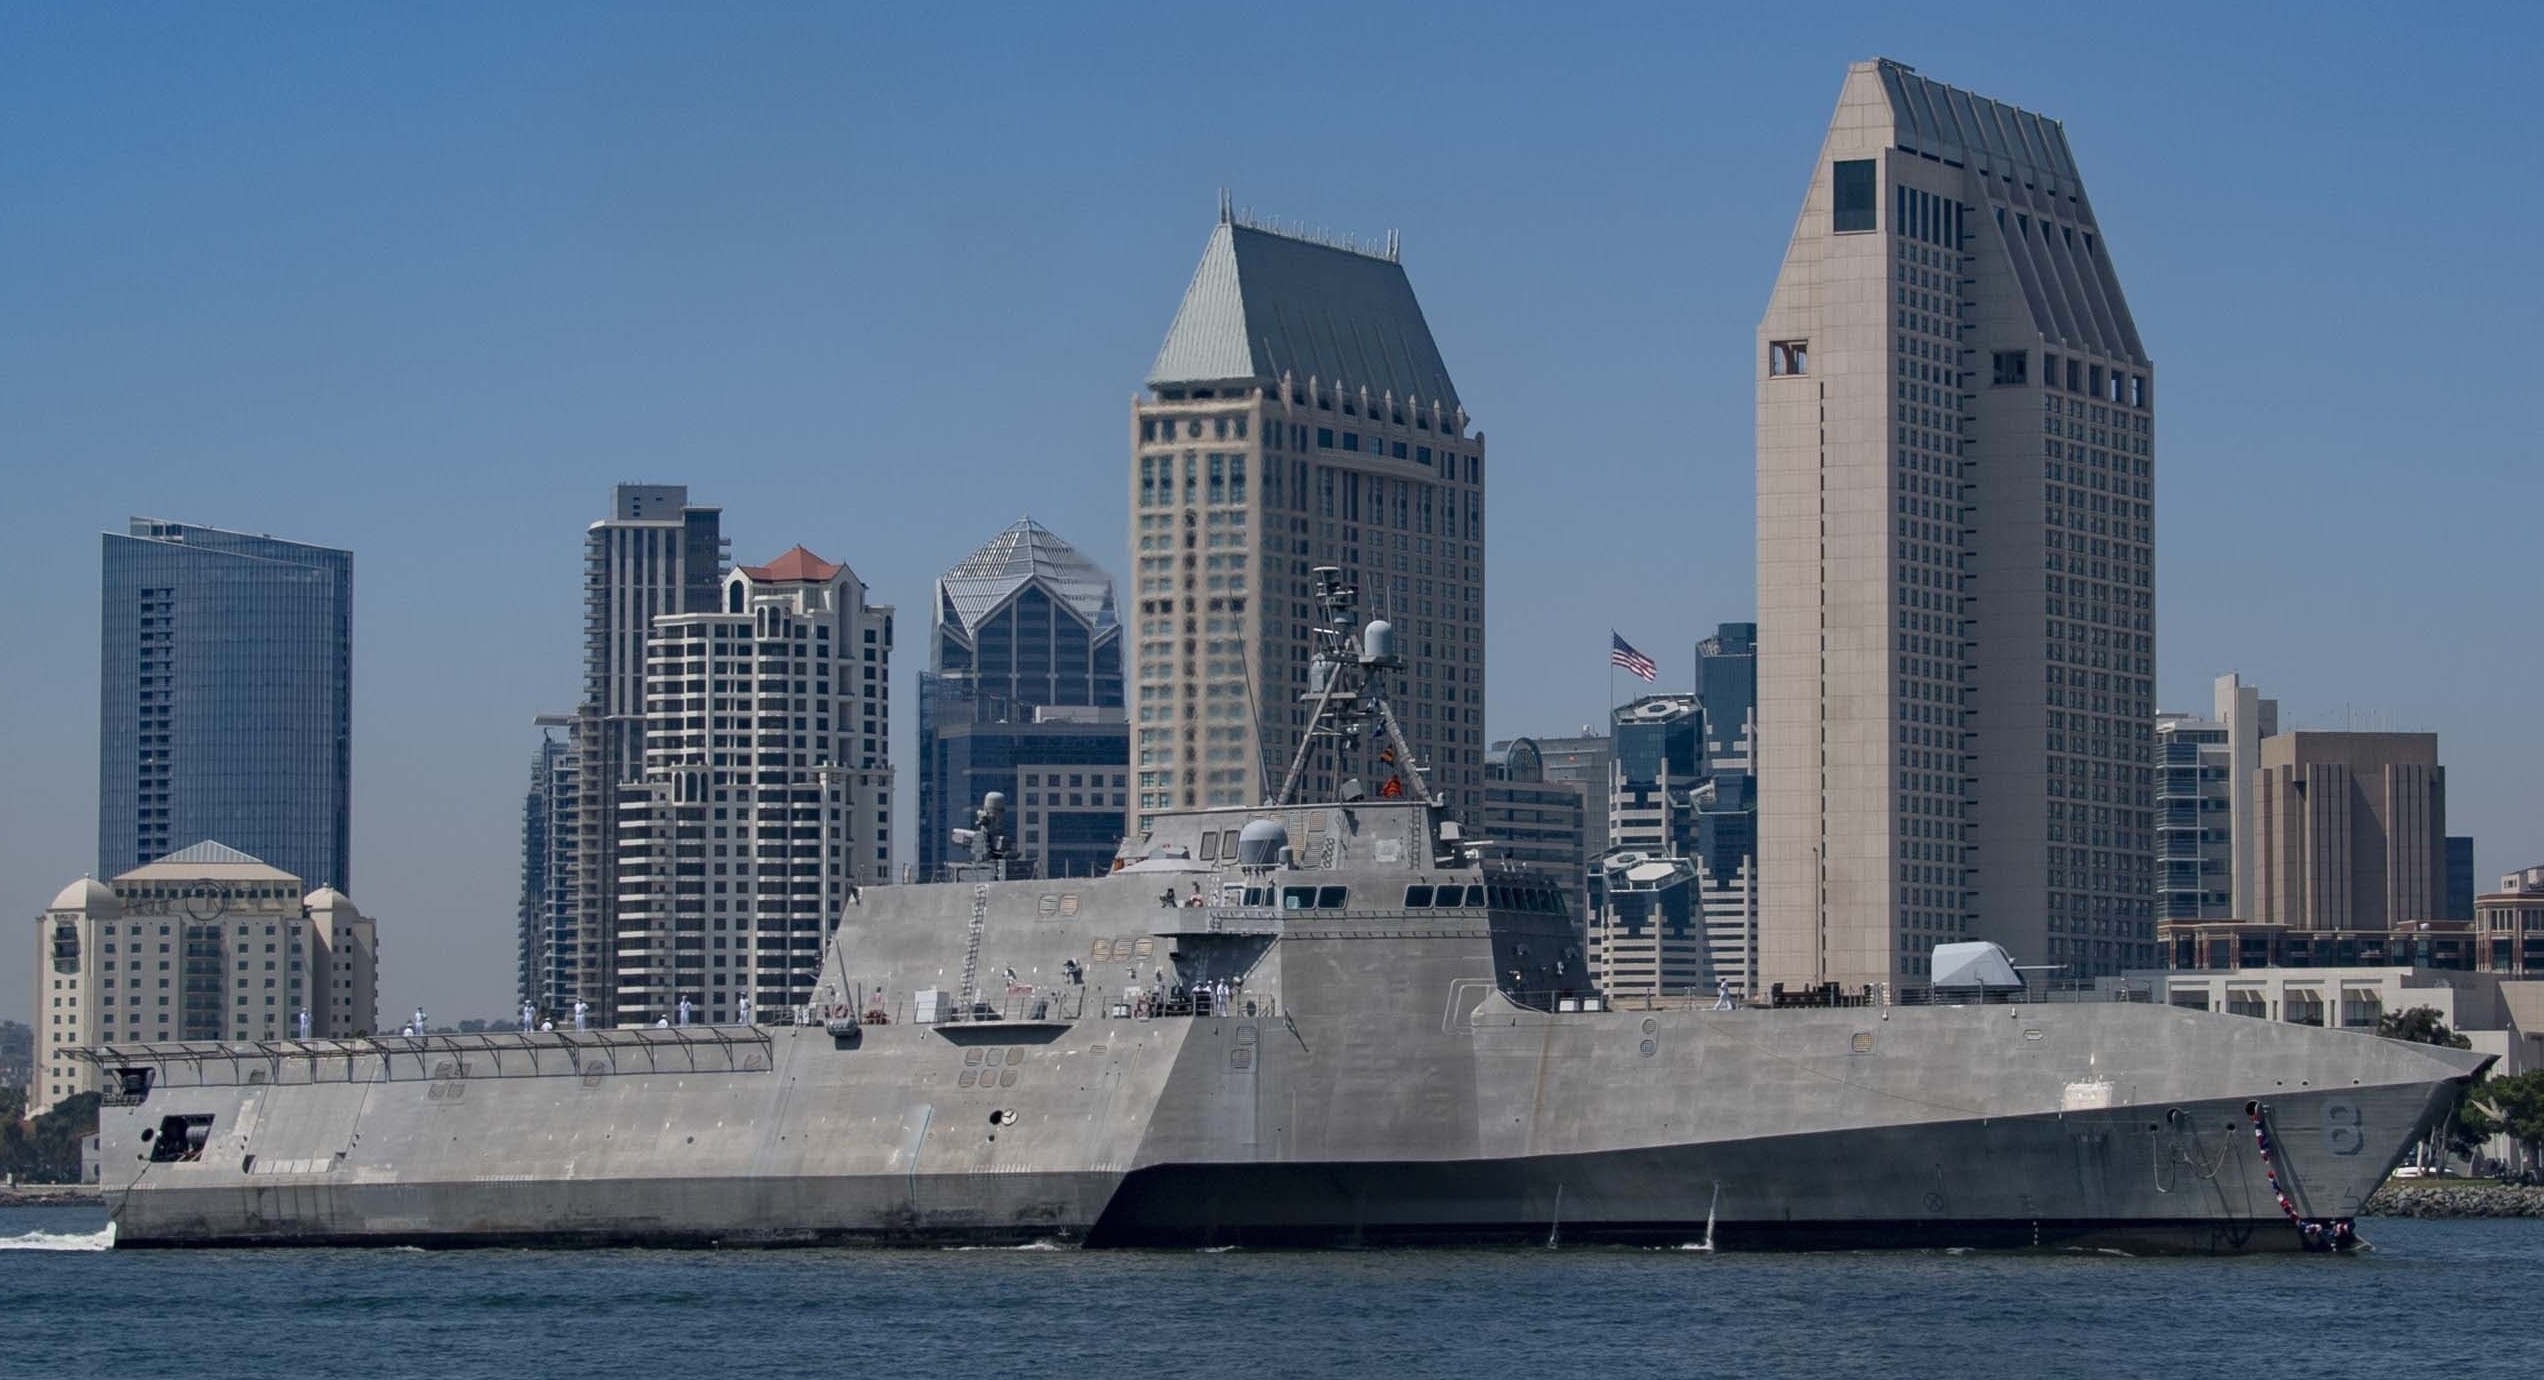 lcs-8 uss montgomery independence class littoral combat ship us navy 12 san diego returning deployment